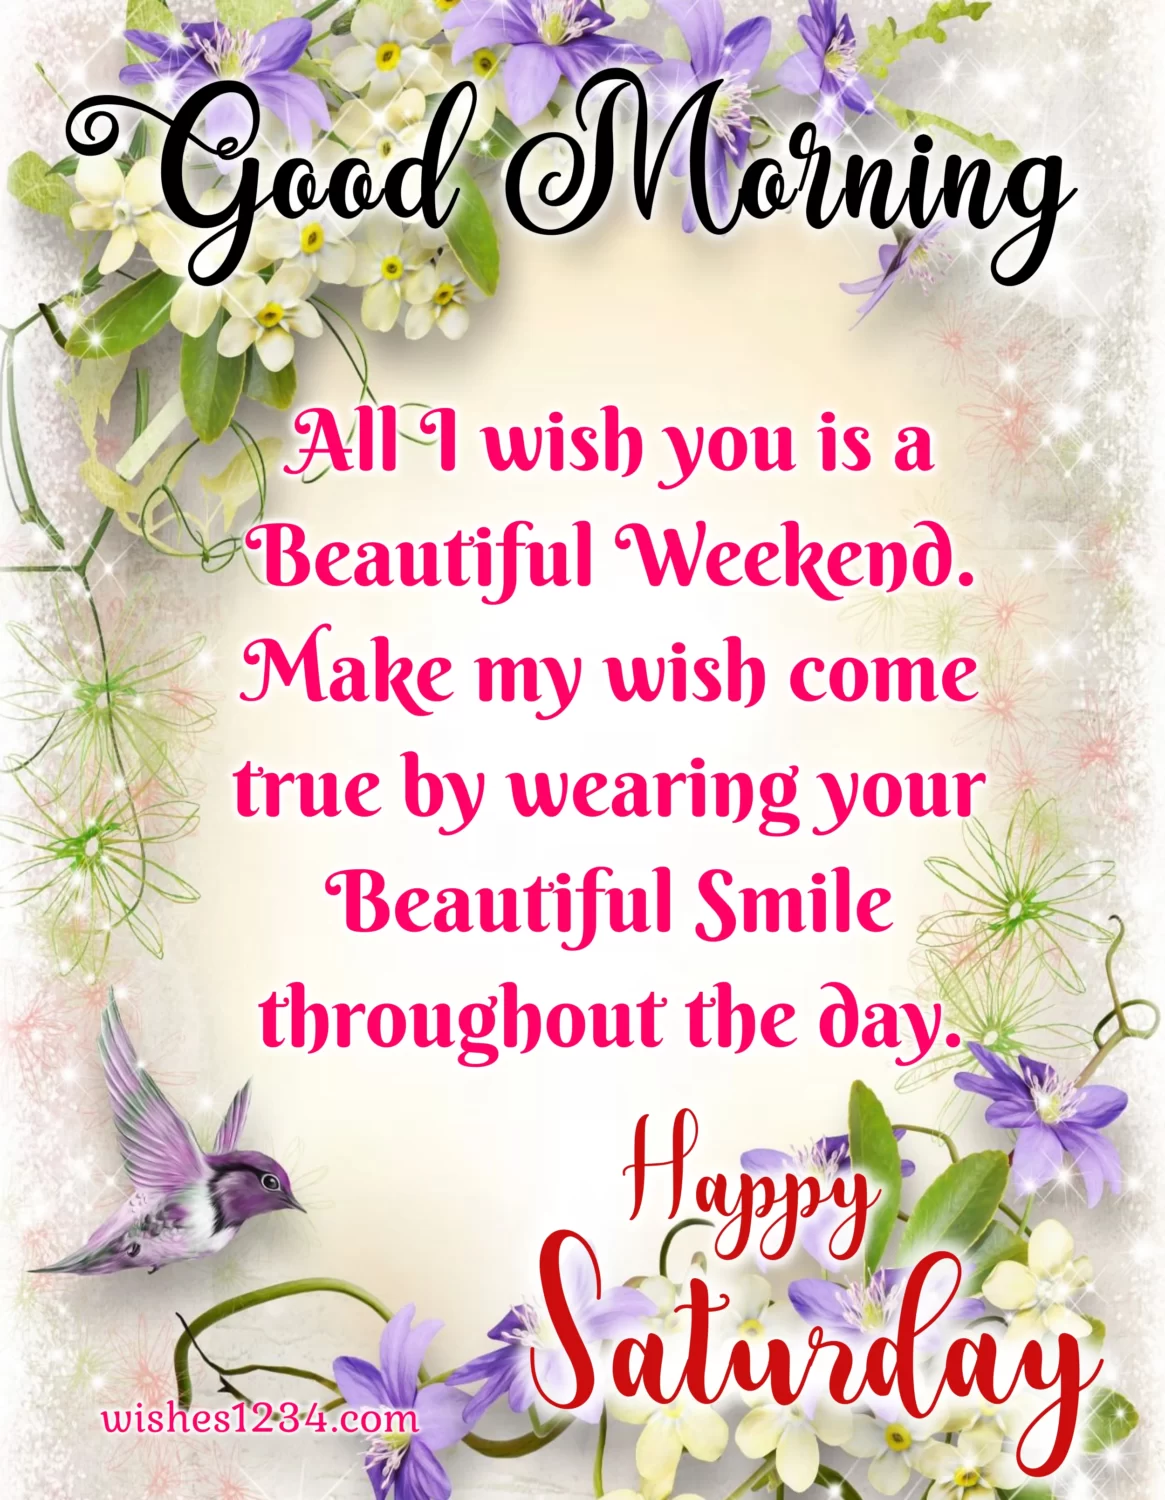 Saturday quotes with beautiful flowers background, Saturday good morning images.